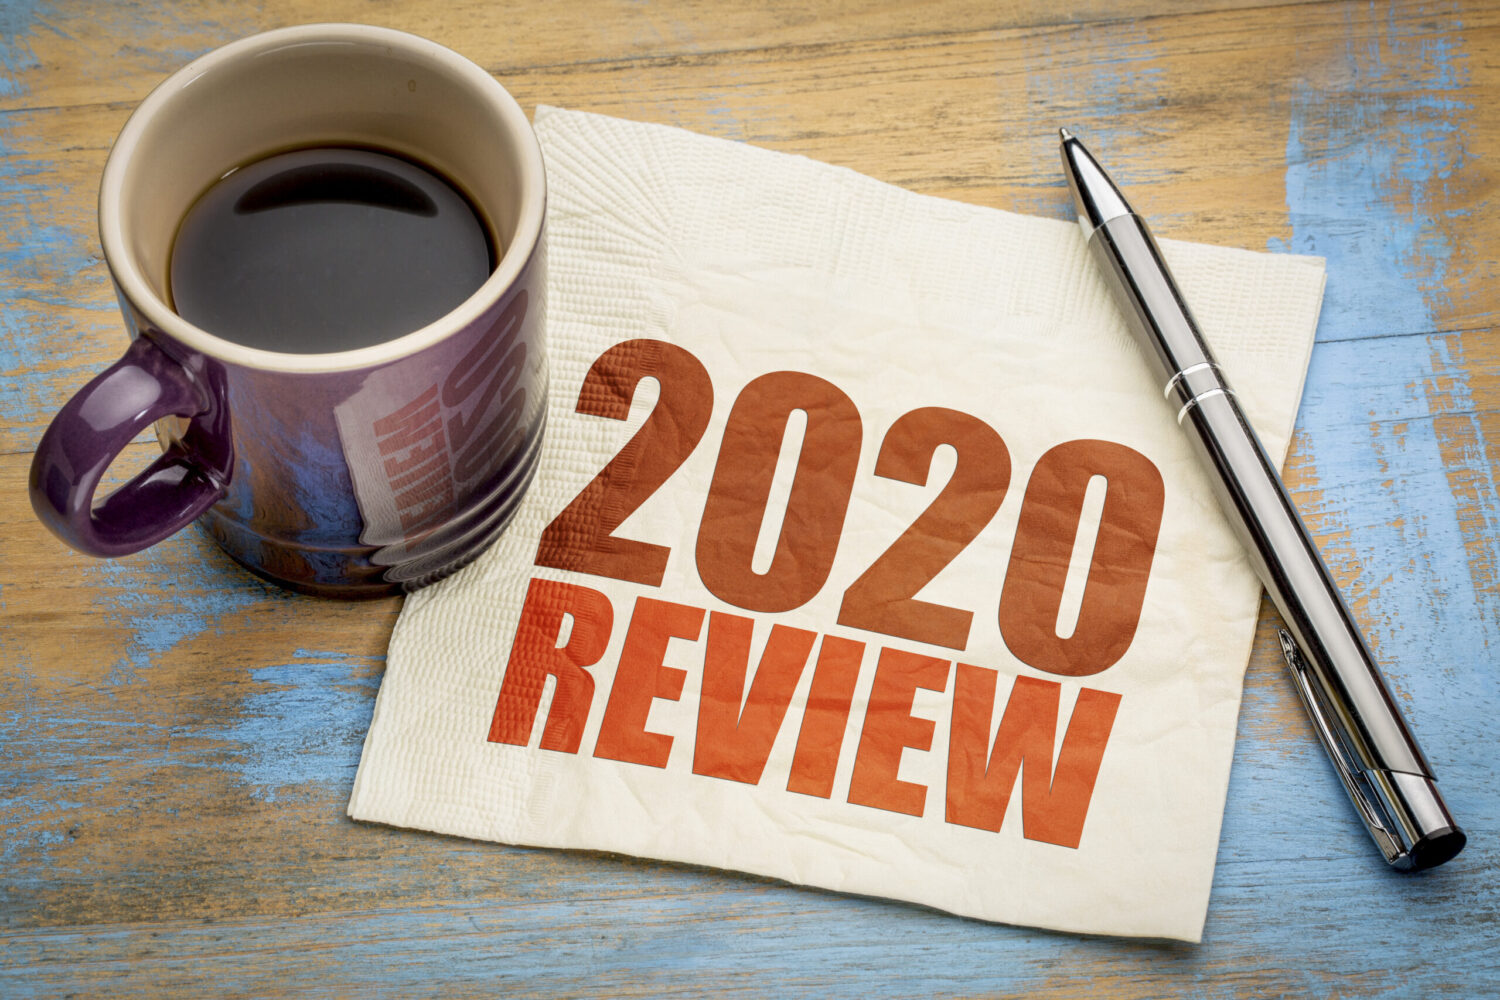 2020 year review text on a napkin with a cup of coffee, end of year business concept